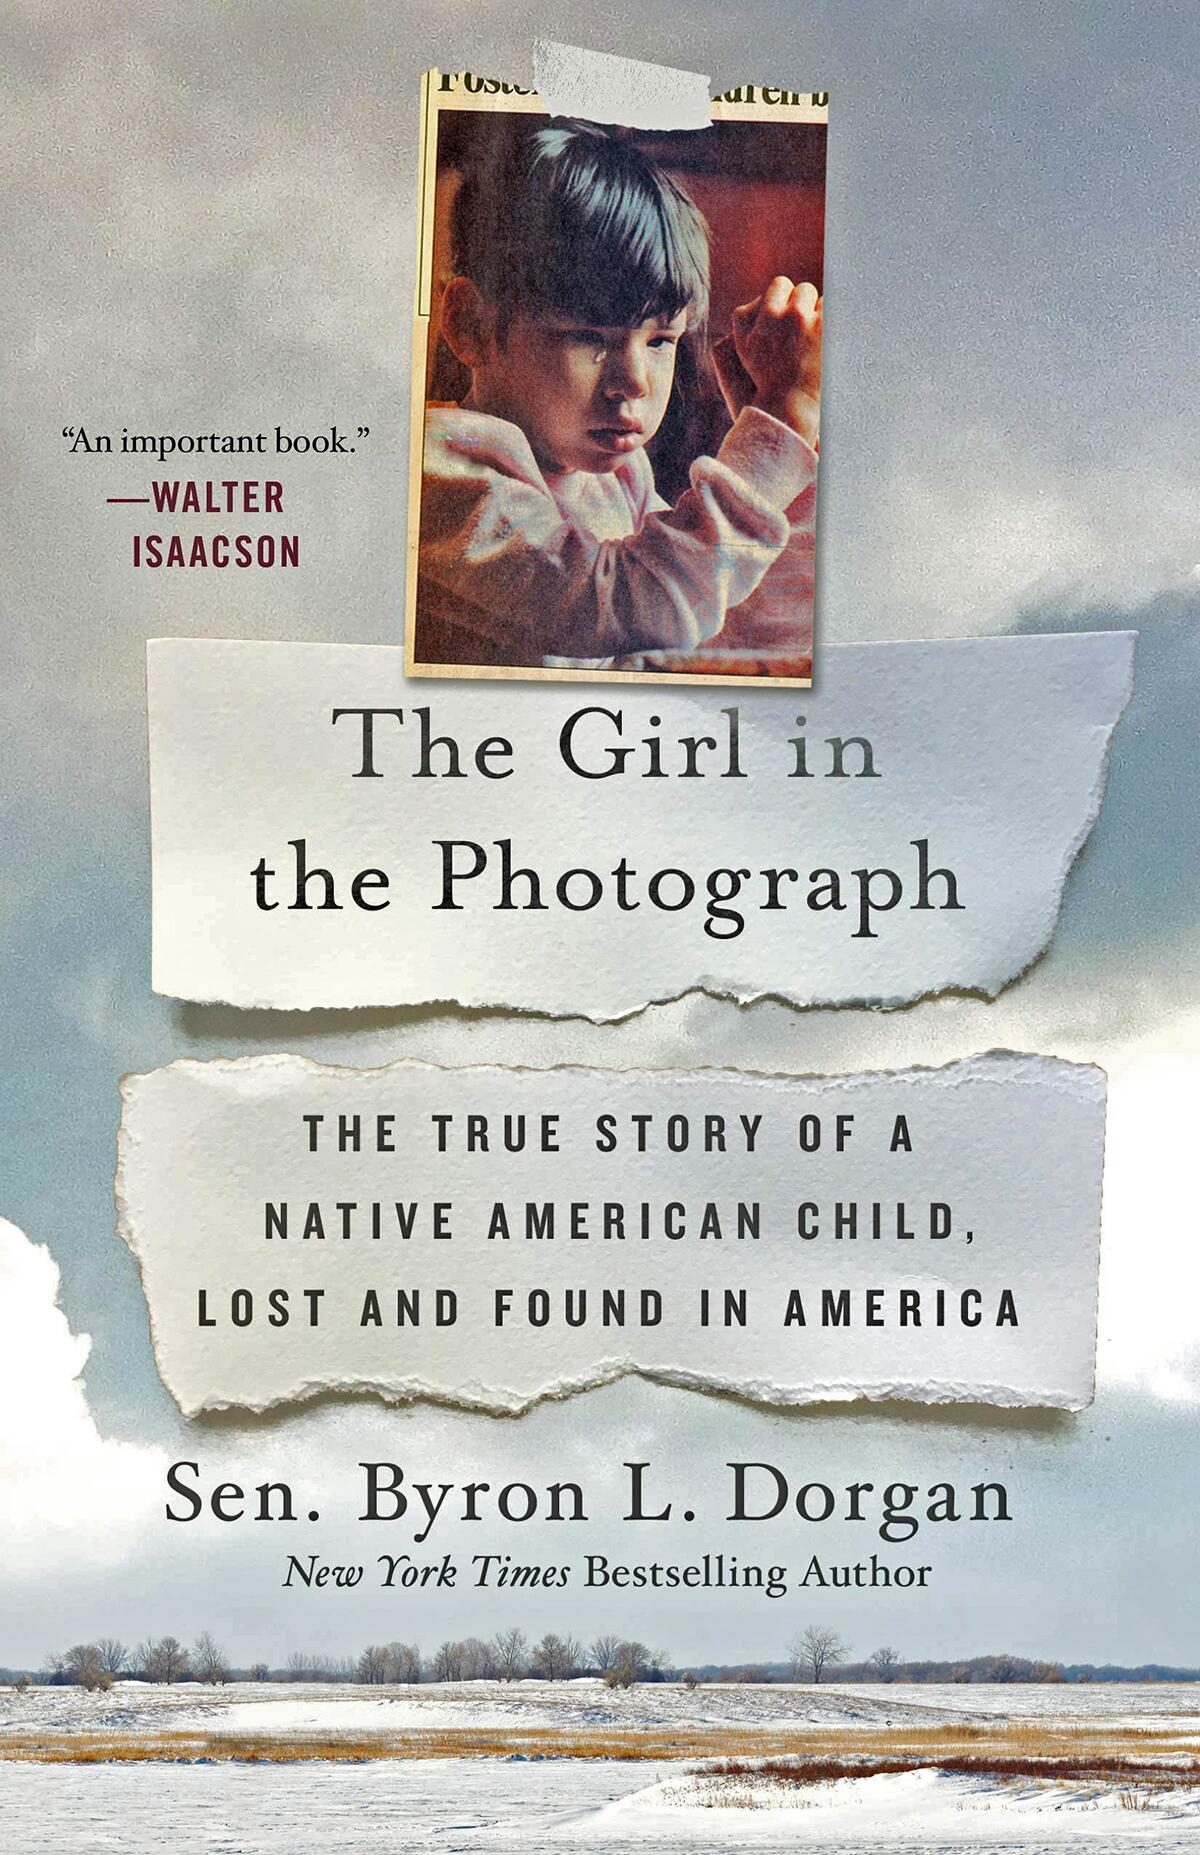 Former U.S. Senator Byron Dorgan's book, 'The Girl in the Photograph: The True Story of a Native American Child, Lost and Found in America,' was published November 2019 by Thomas Dunne Books.